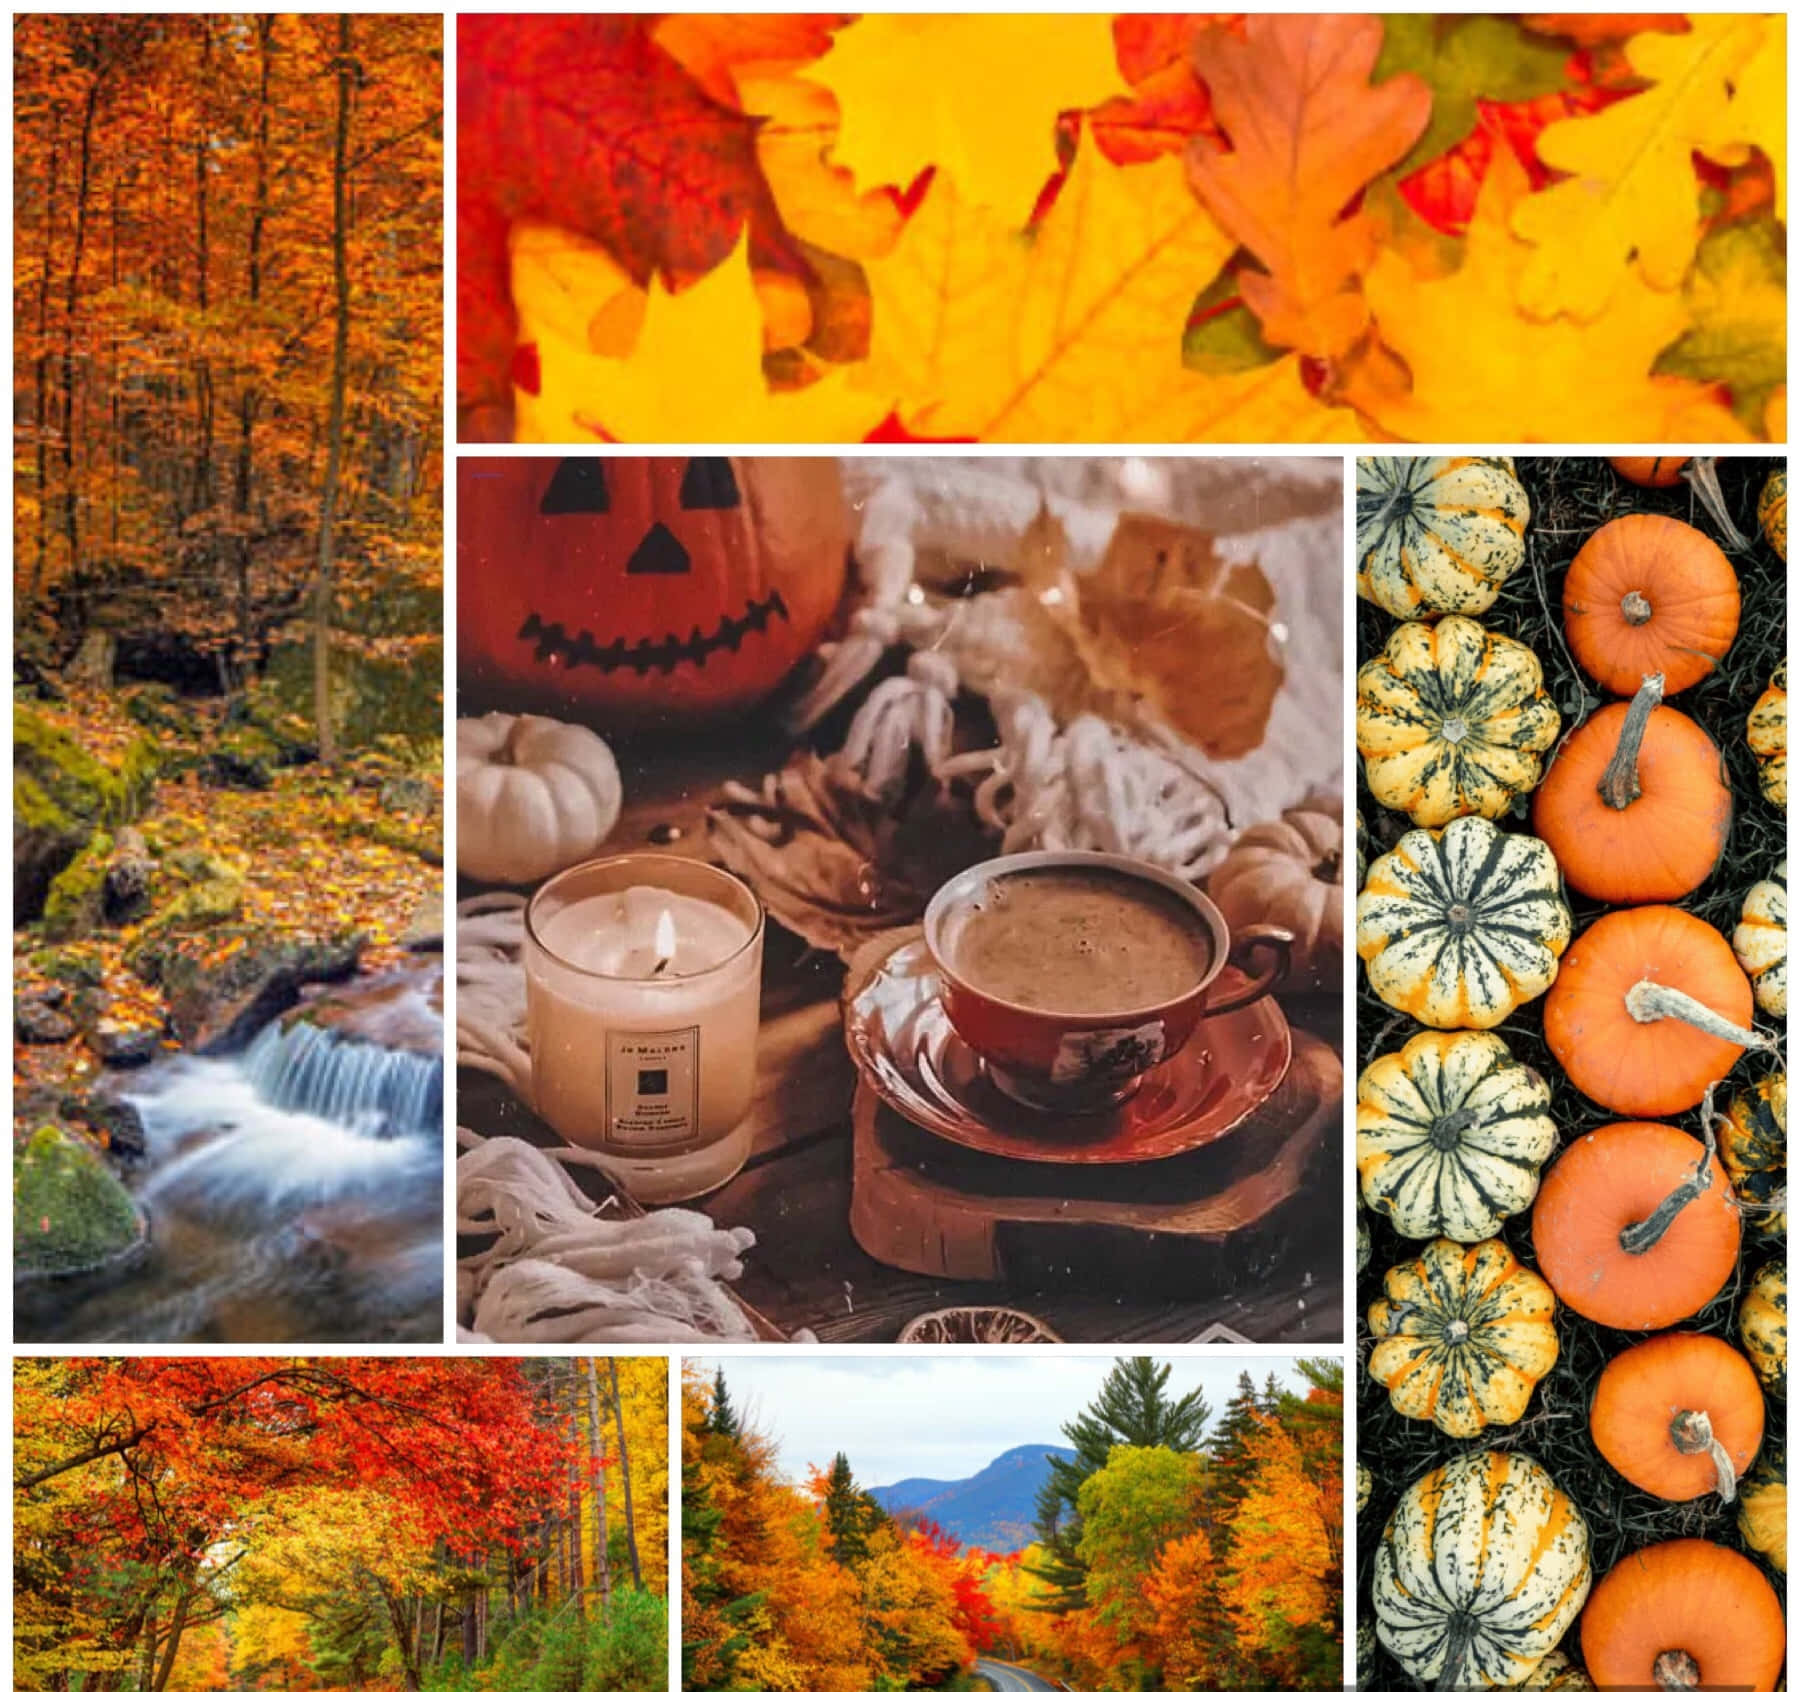 Autumn Collage With Pumpkins, Leaves And A Stream Wallpaper